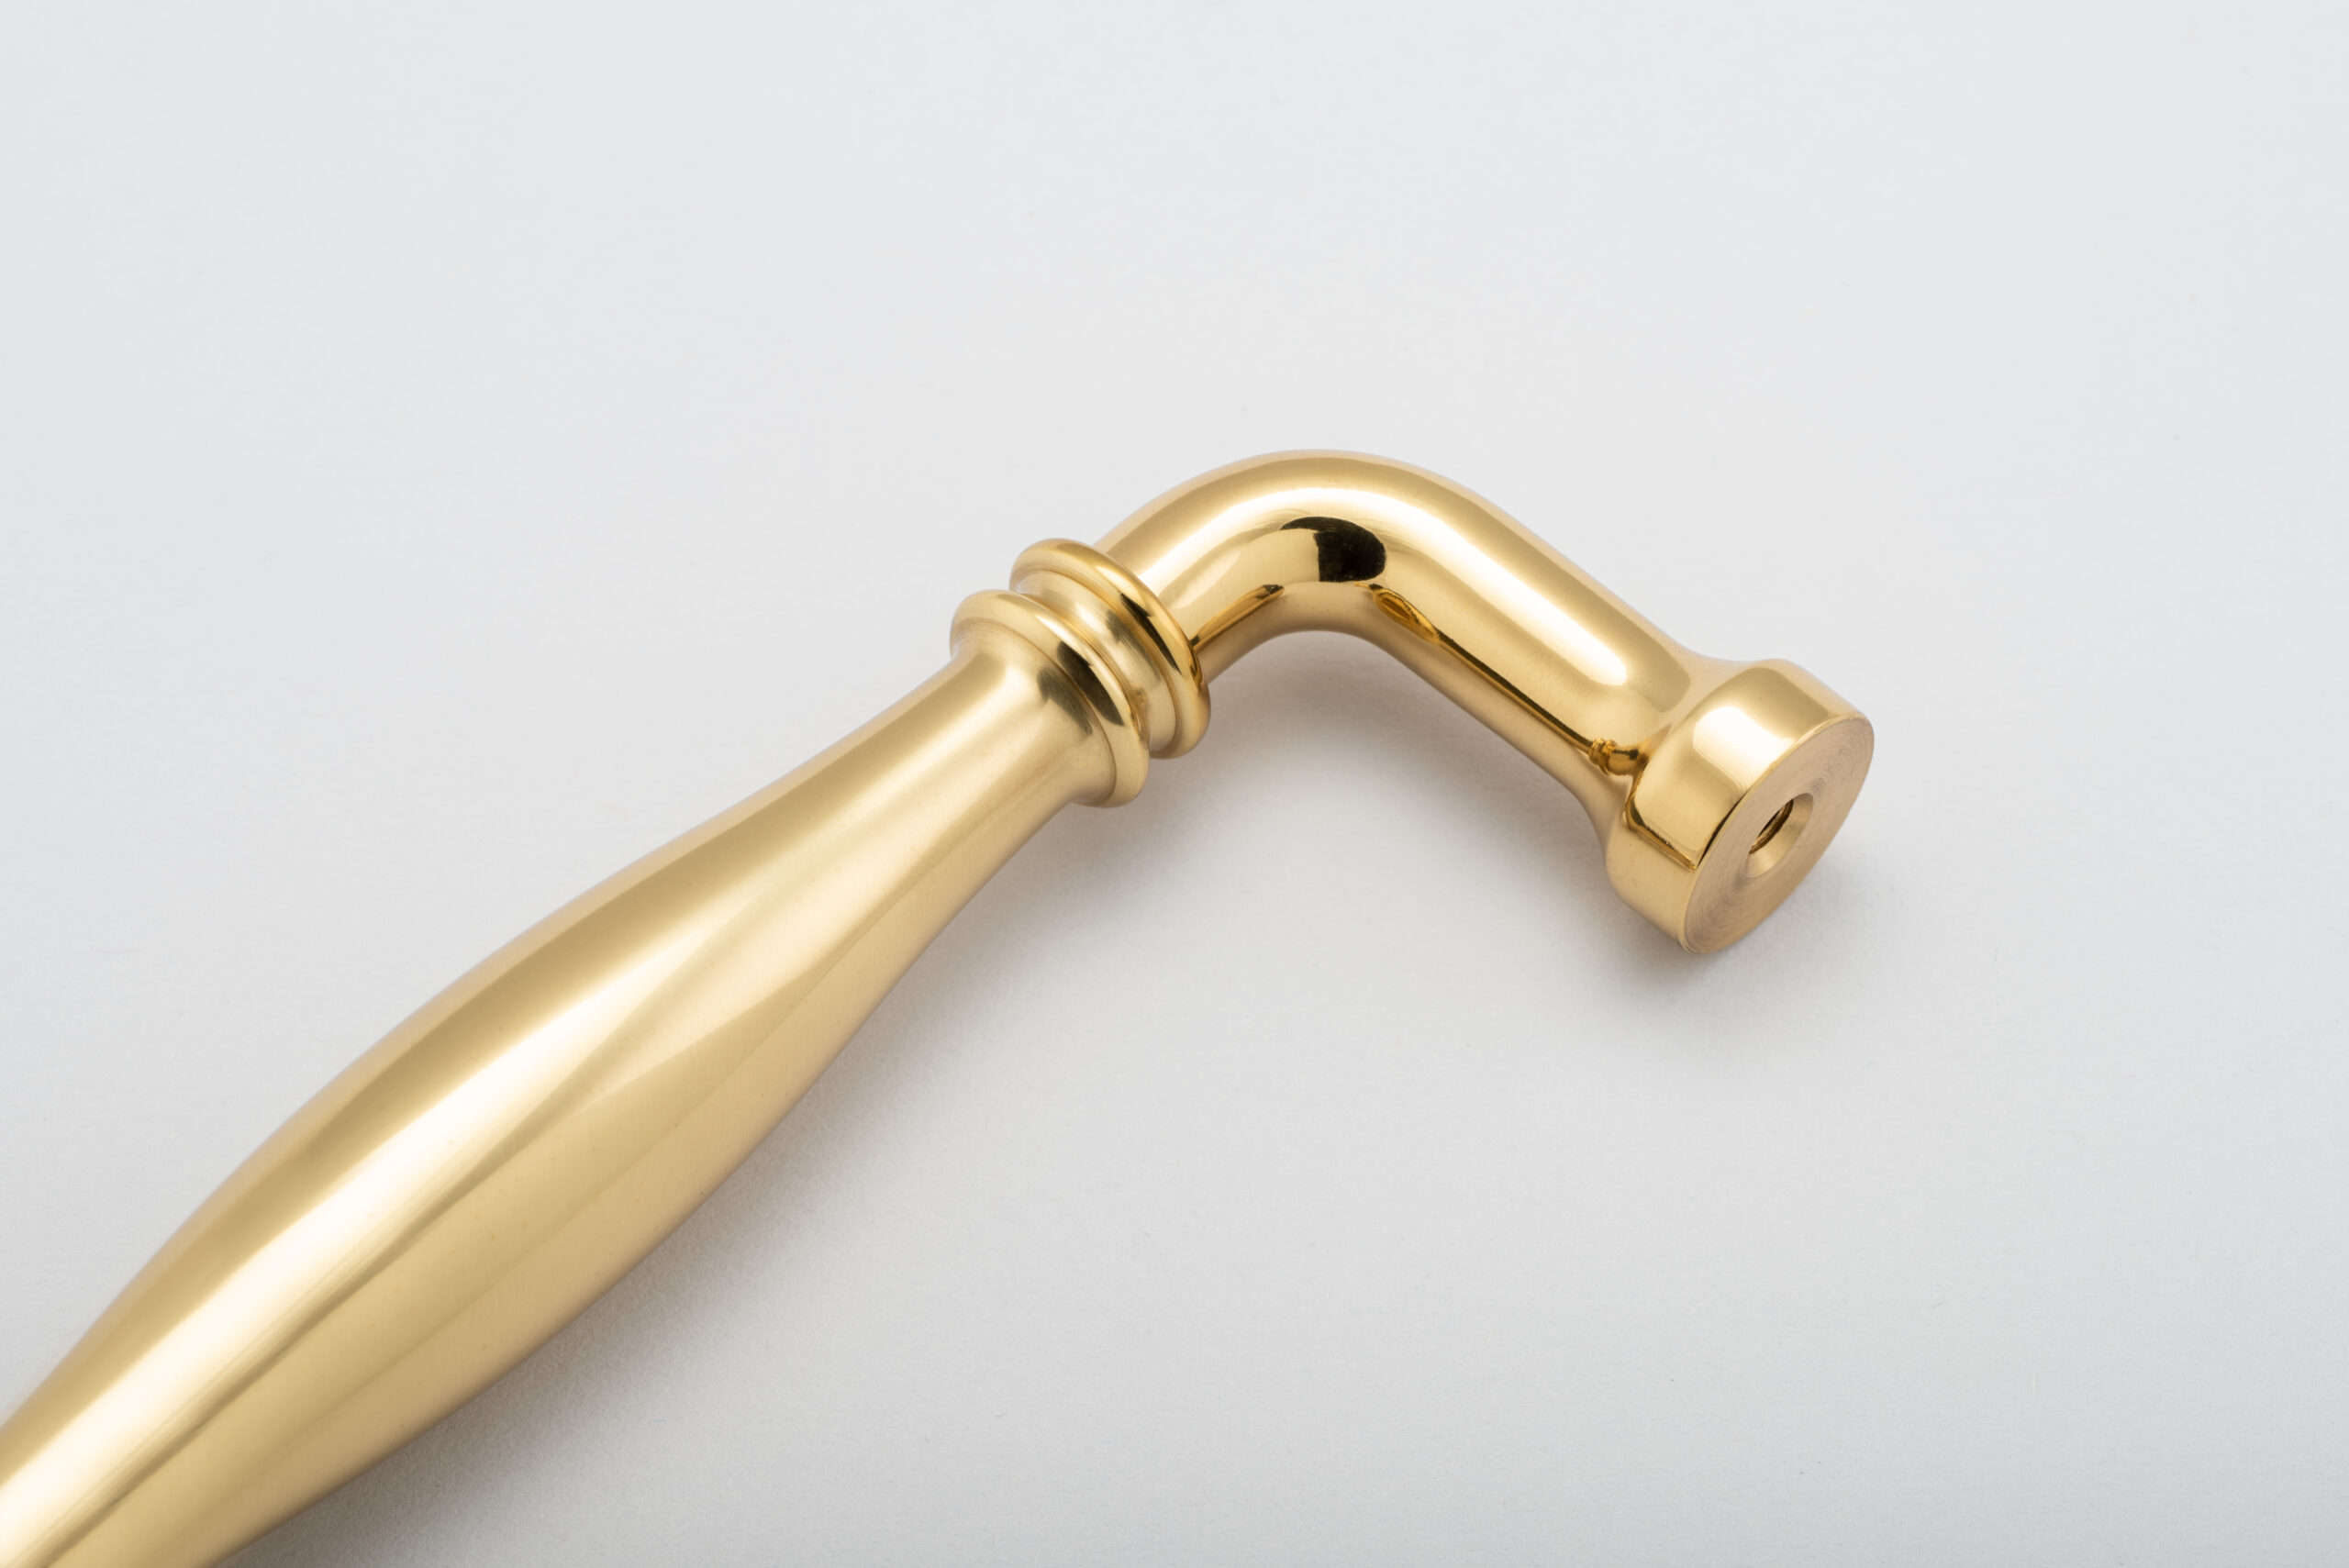 21090B - Sarlat Cabinet Pull with Backplate - CTC320mm - Polished Brass